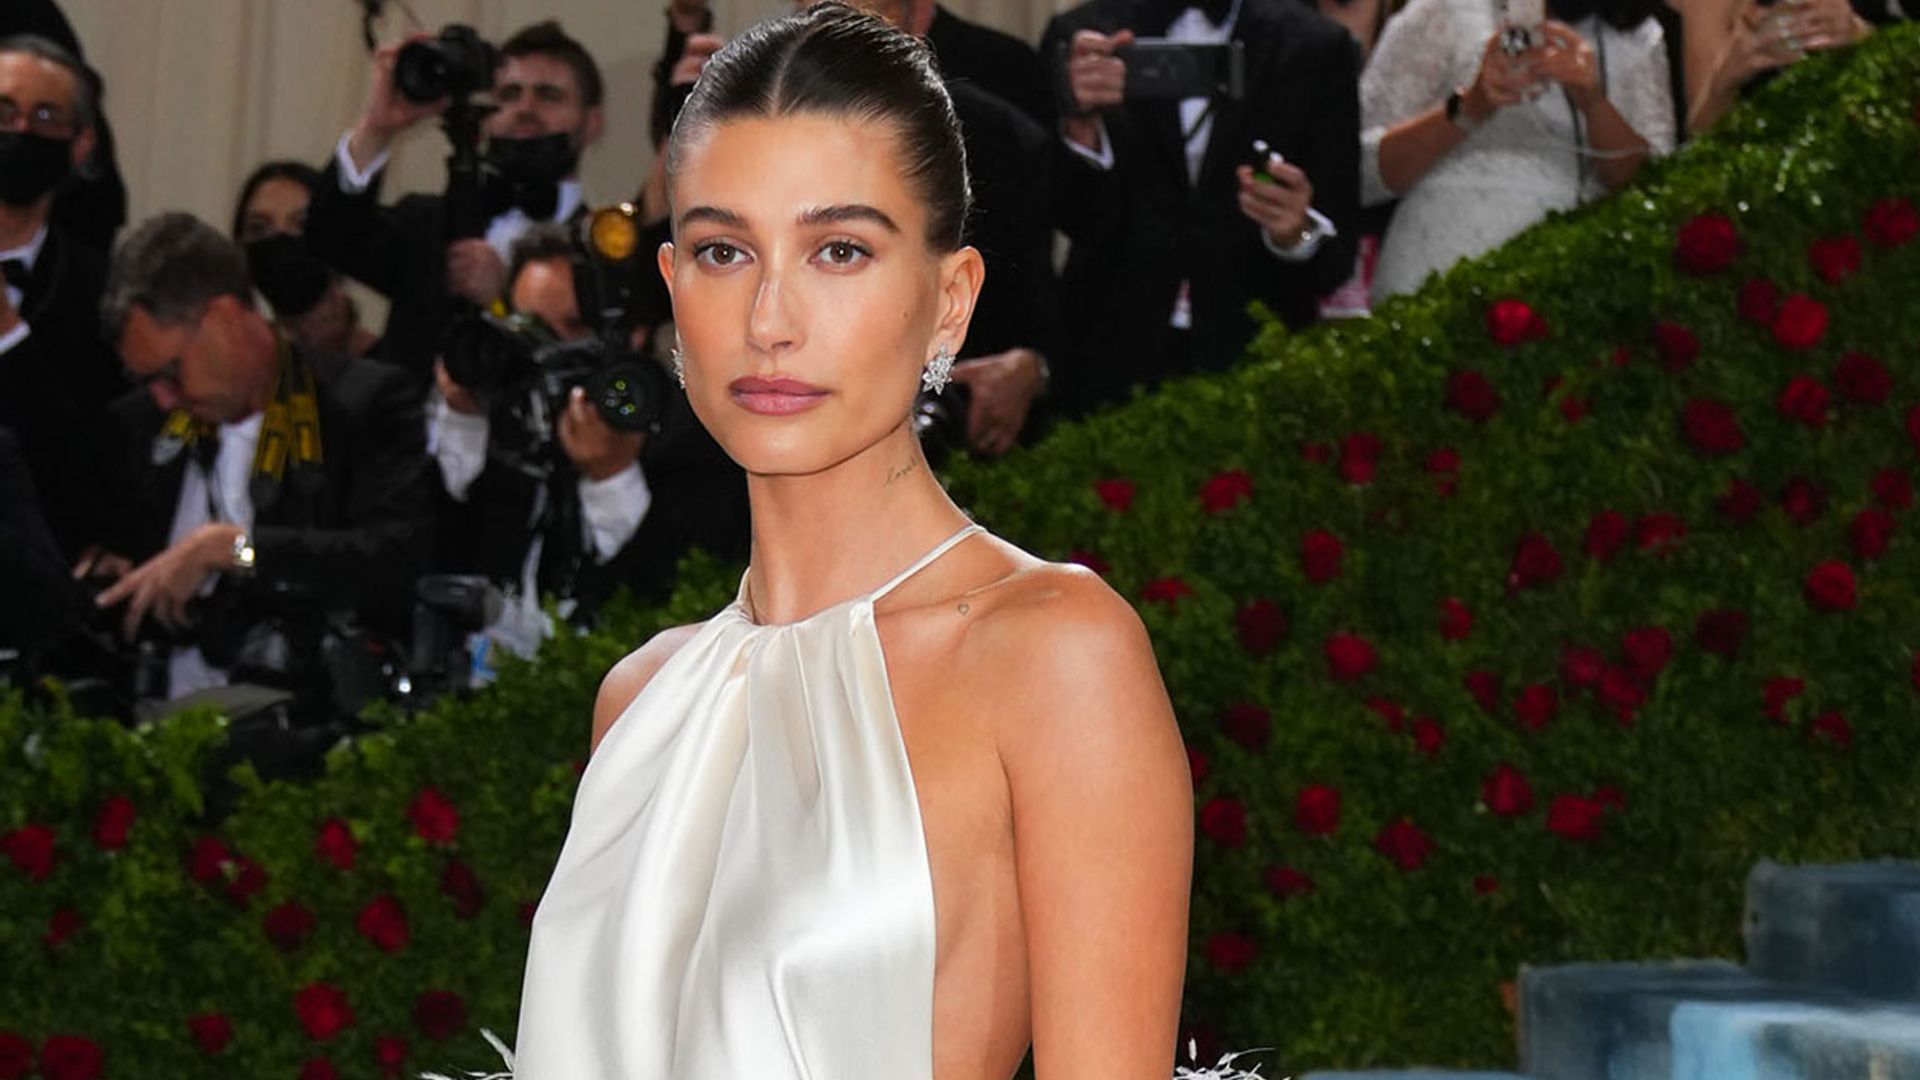 Hailey Bieber's Met Gala After-Party Look Included a Sheer